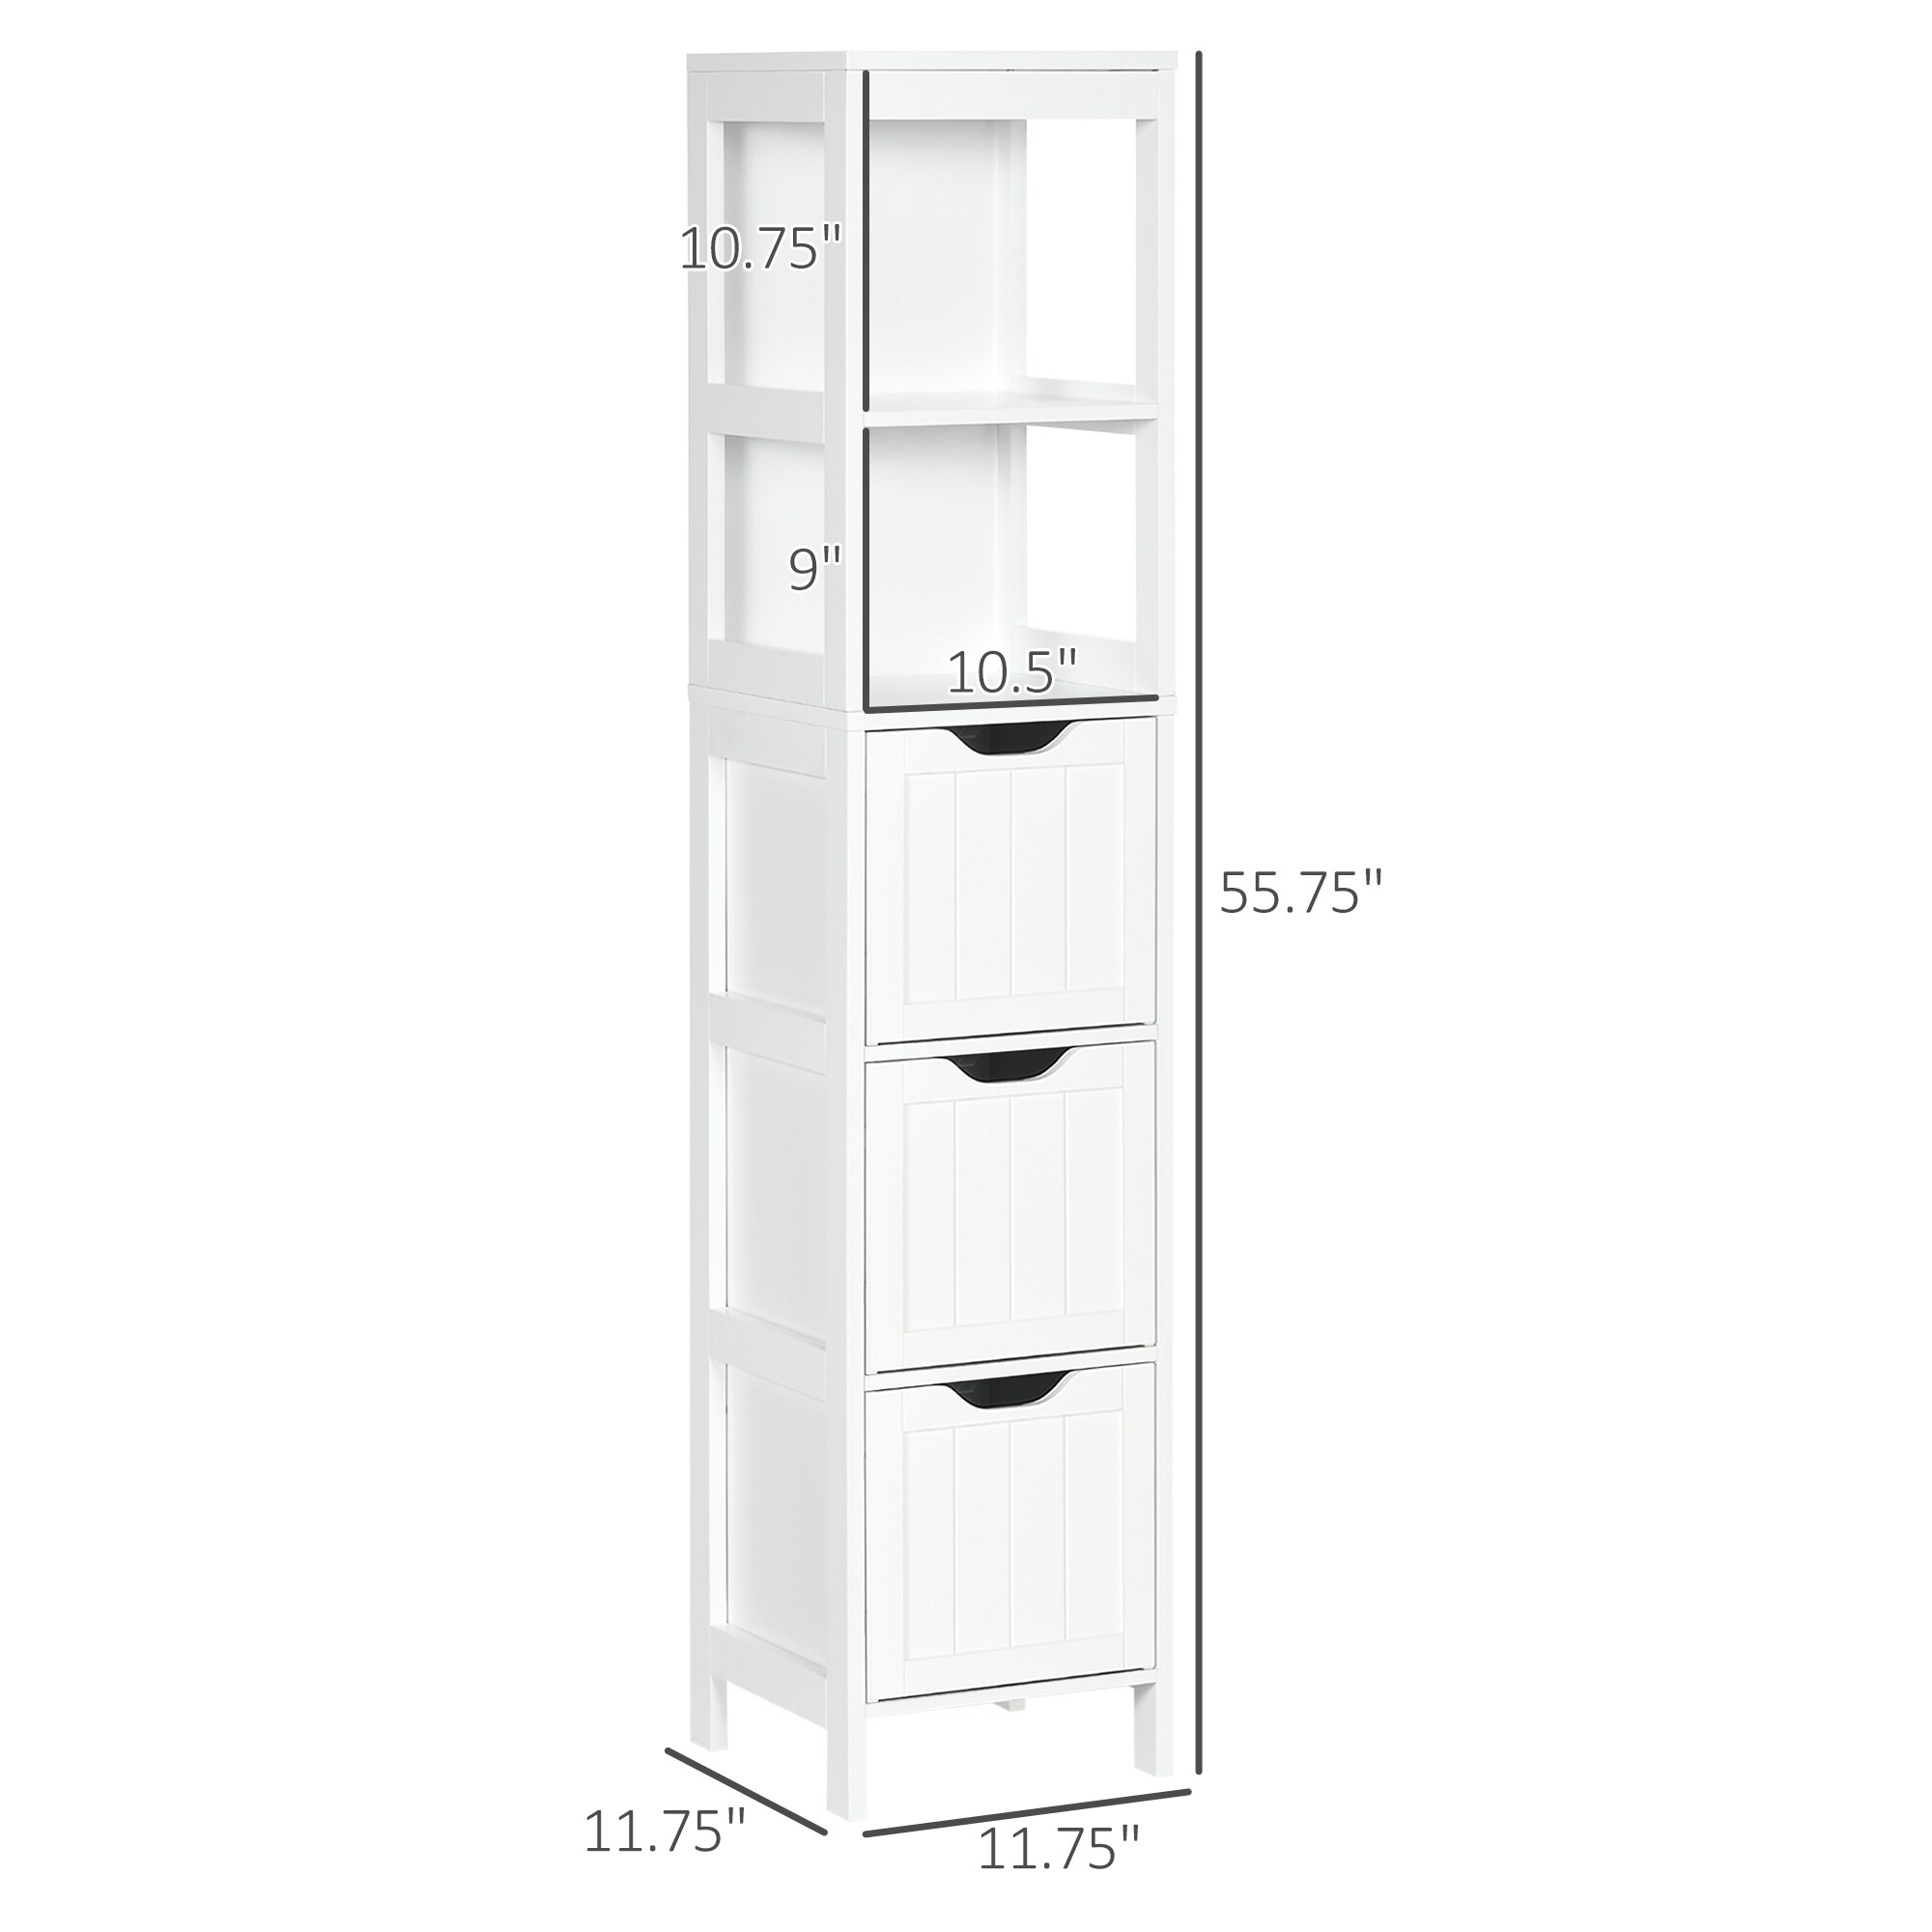 https://ak1.ostkcdn.com/images/products/is/images/direct/b7f191ad46f47285173a0210a9e25087787a906e/kleankin-Narrow-Bathroom-Cabinet-with-3-Drawers-and-2-Tier-Shelf%2C-Tall-Cupboard-Freestanding-Linen-Towel%2C-Slim-Corner-Organizer.jpg